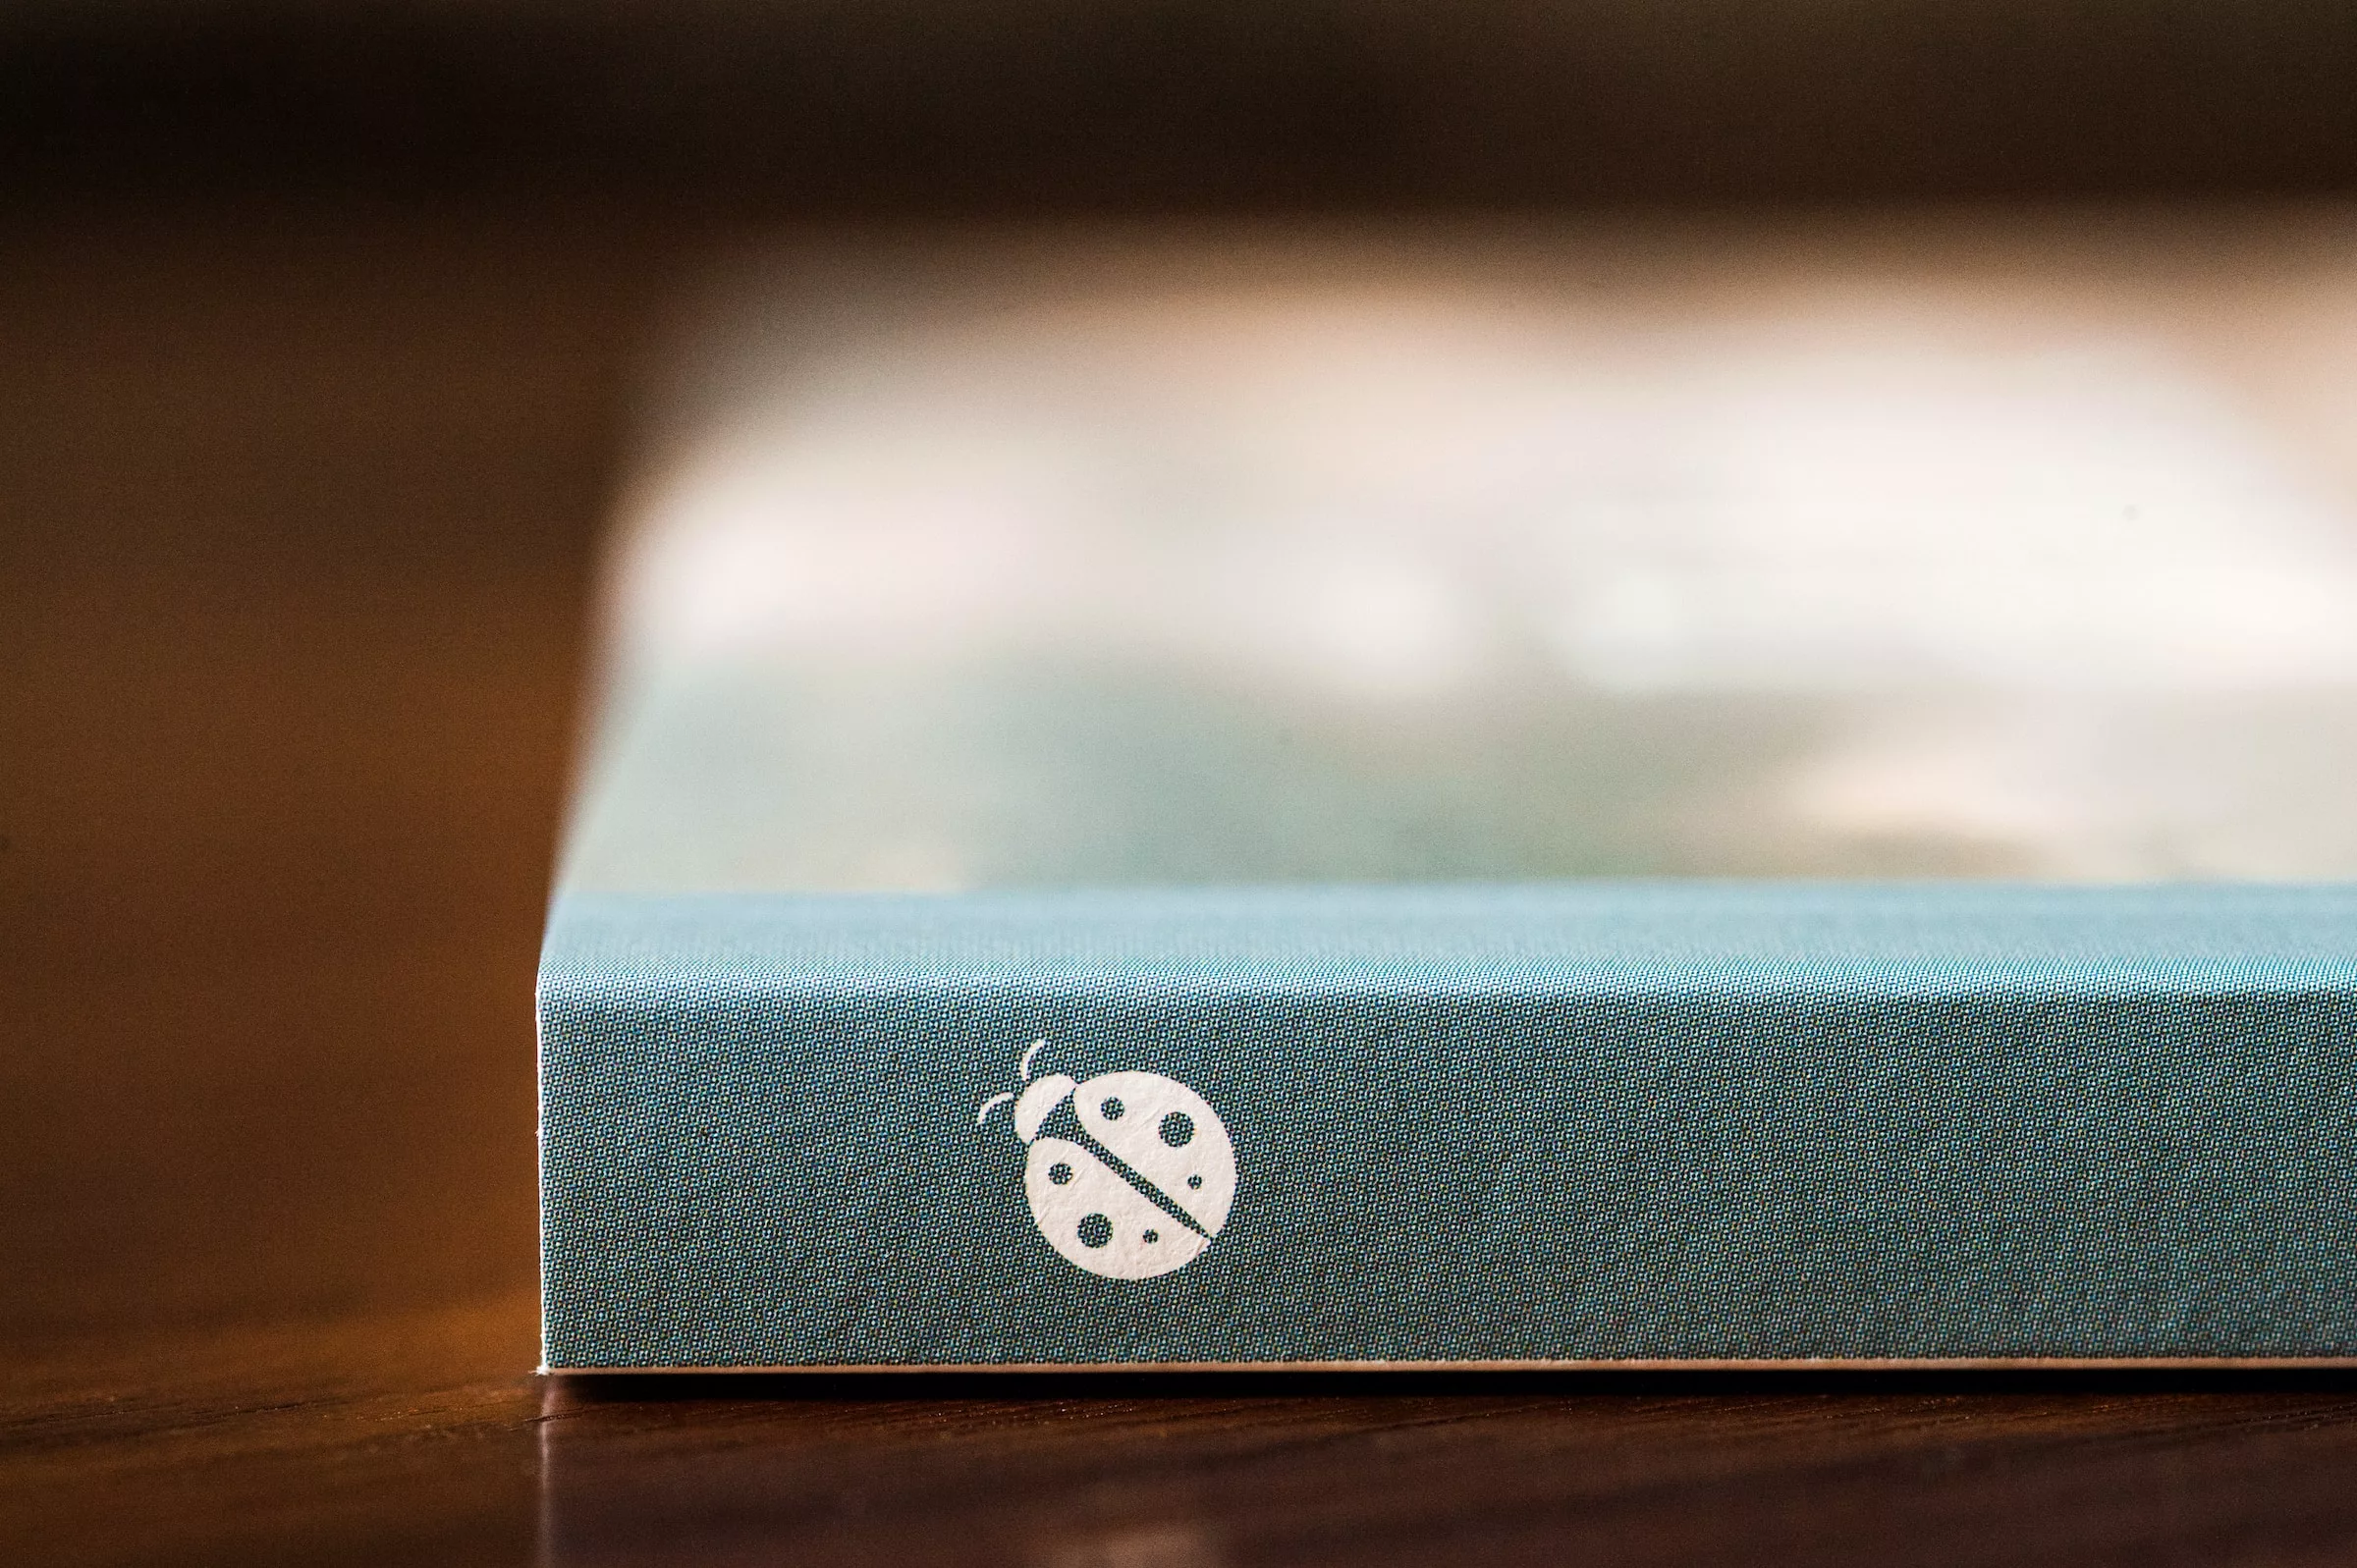  A close up, soft focus view of a aqua coloured book spine, stamped with a white ladybird beetle logo